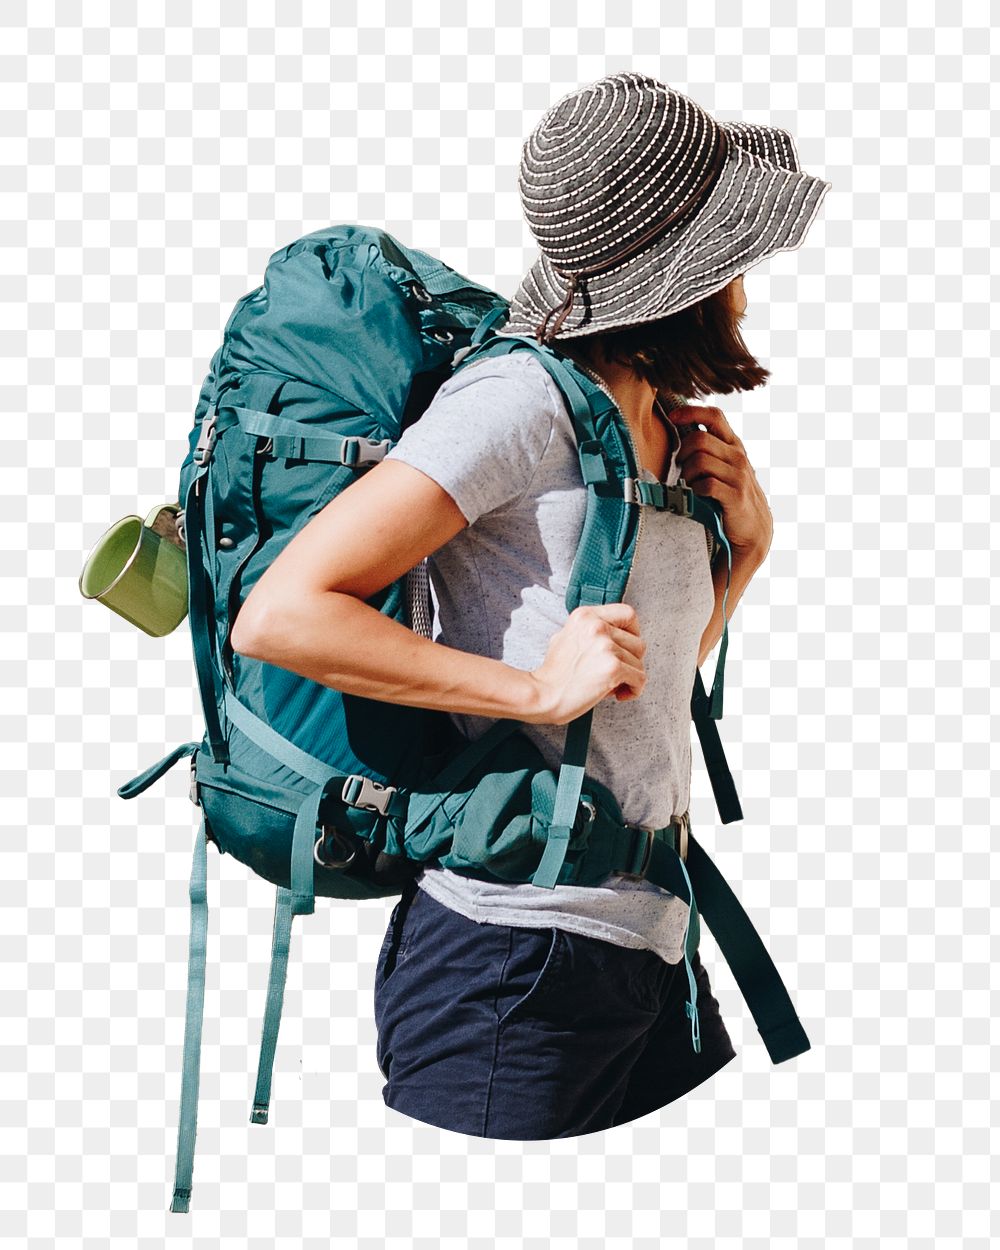 Woman backpacker png sticker, transparent background